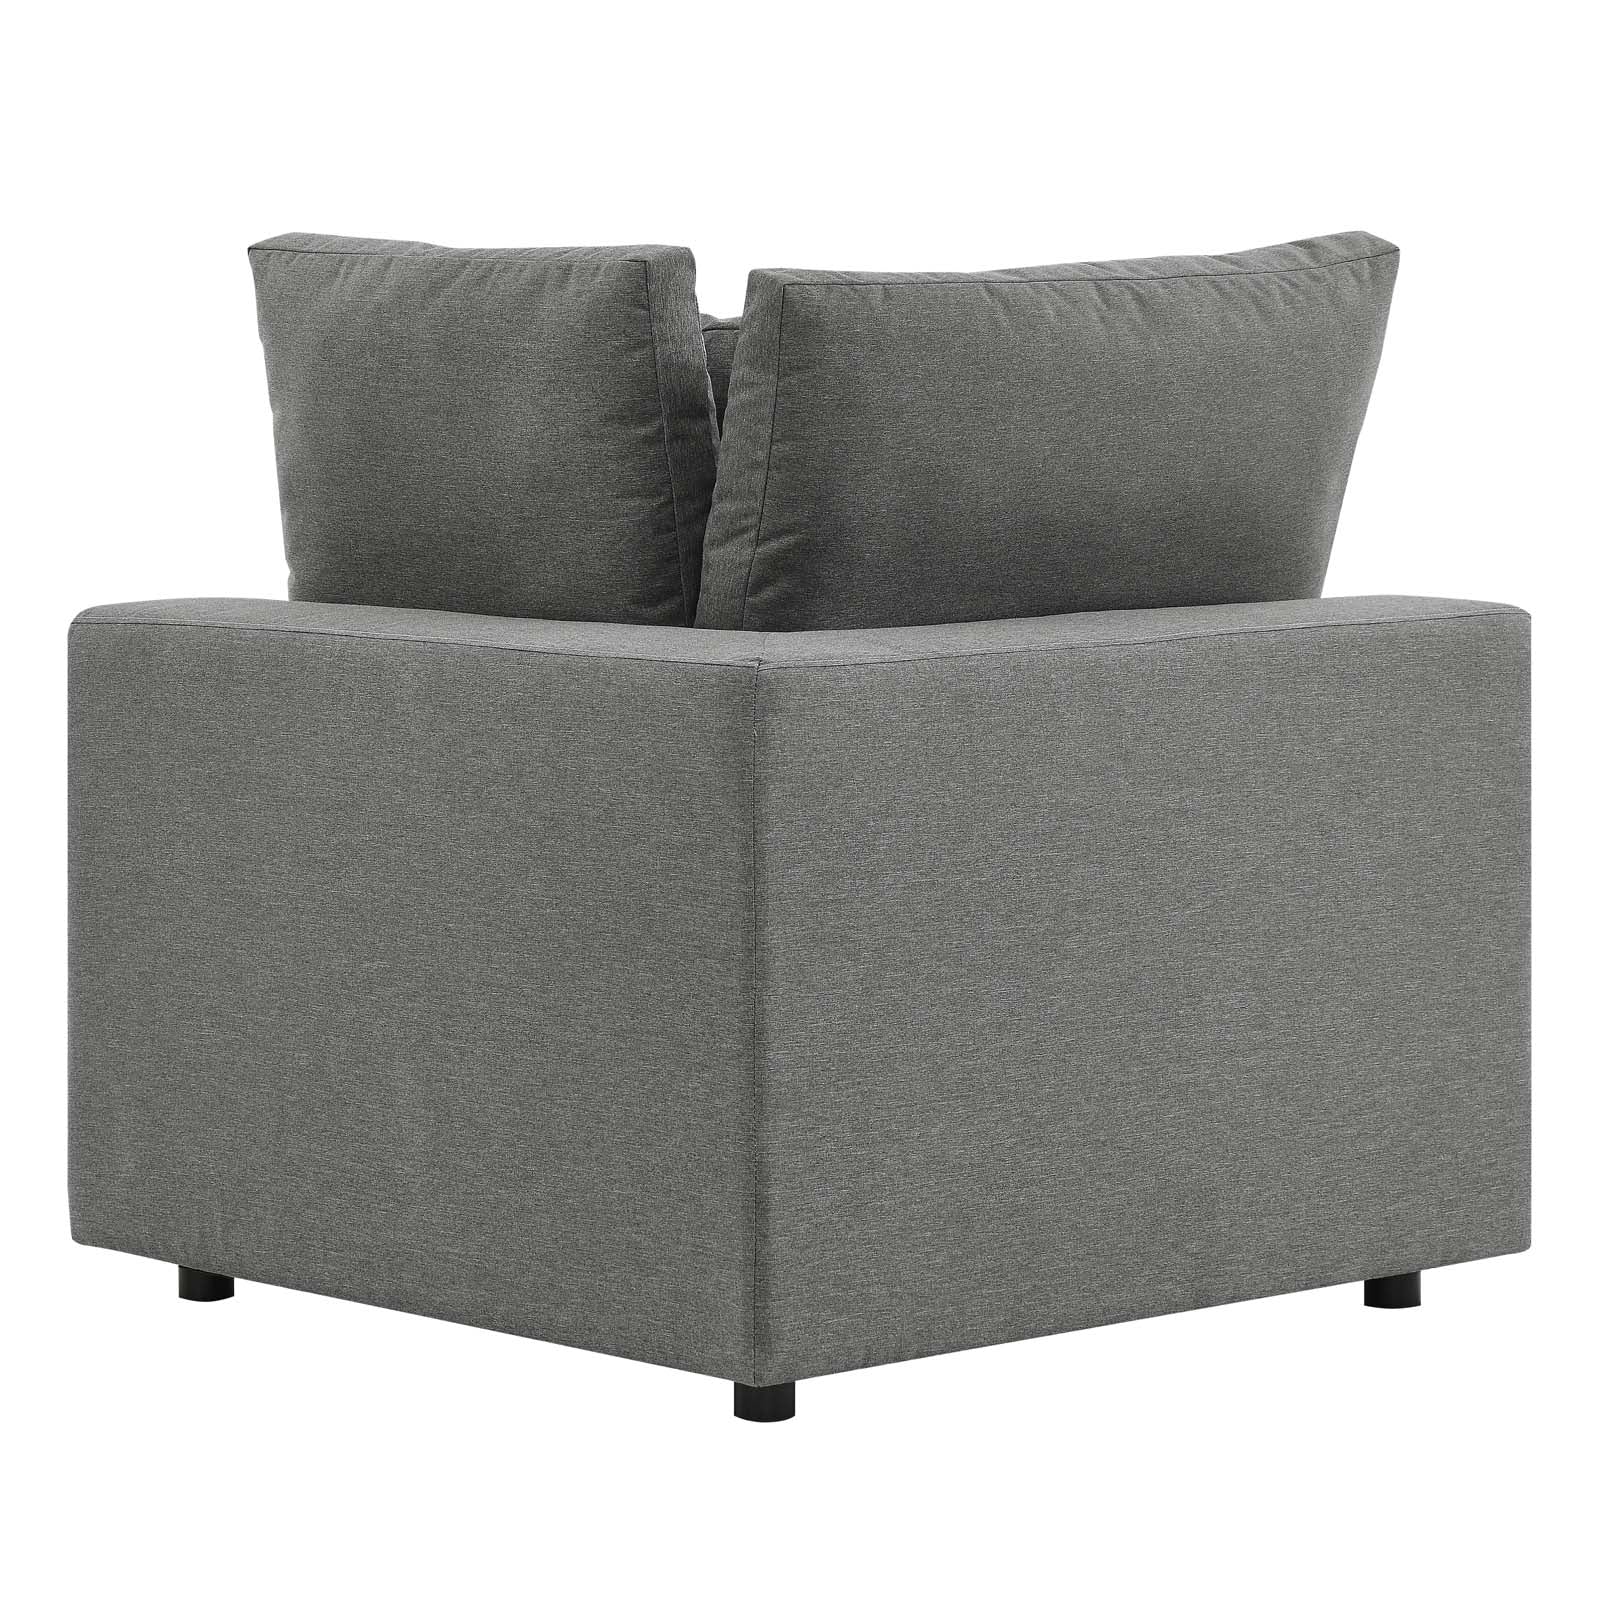 Modway Outdoor Sofas - Commix Overstuffed Outdoor Patio Loveseat Charcoal